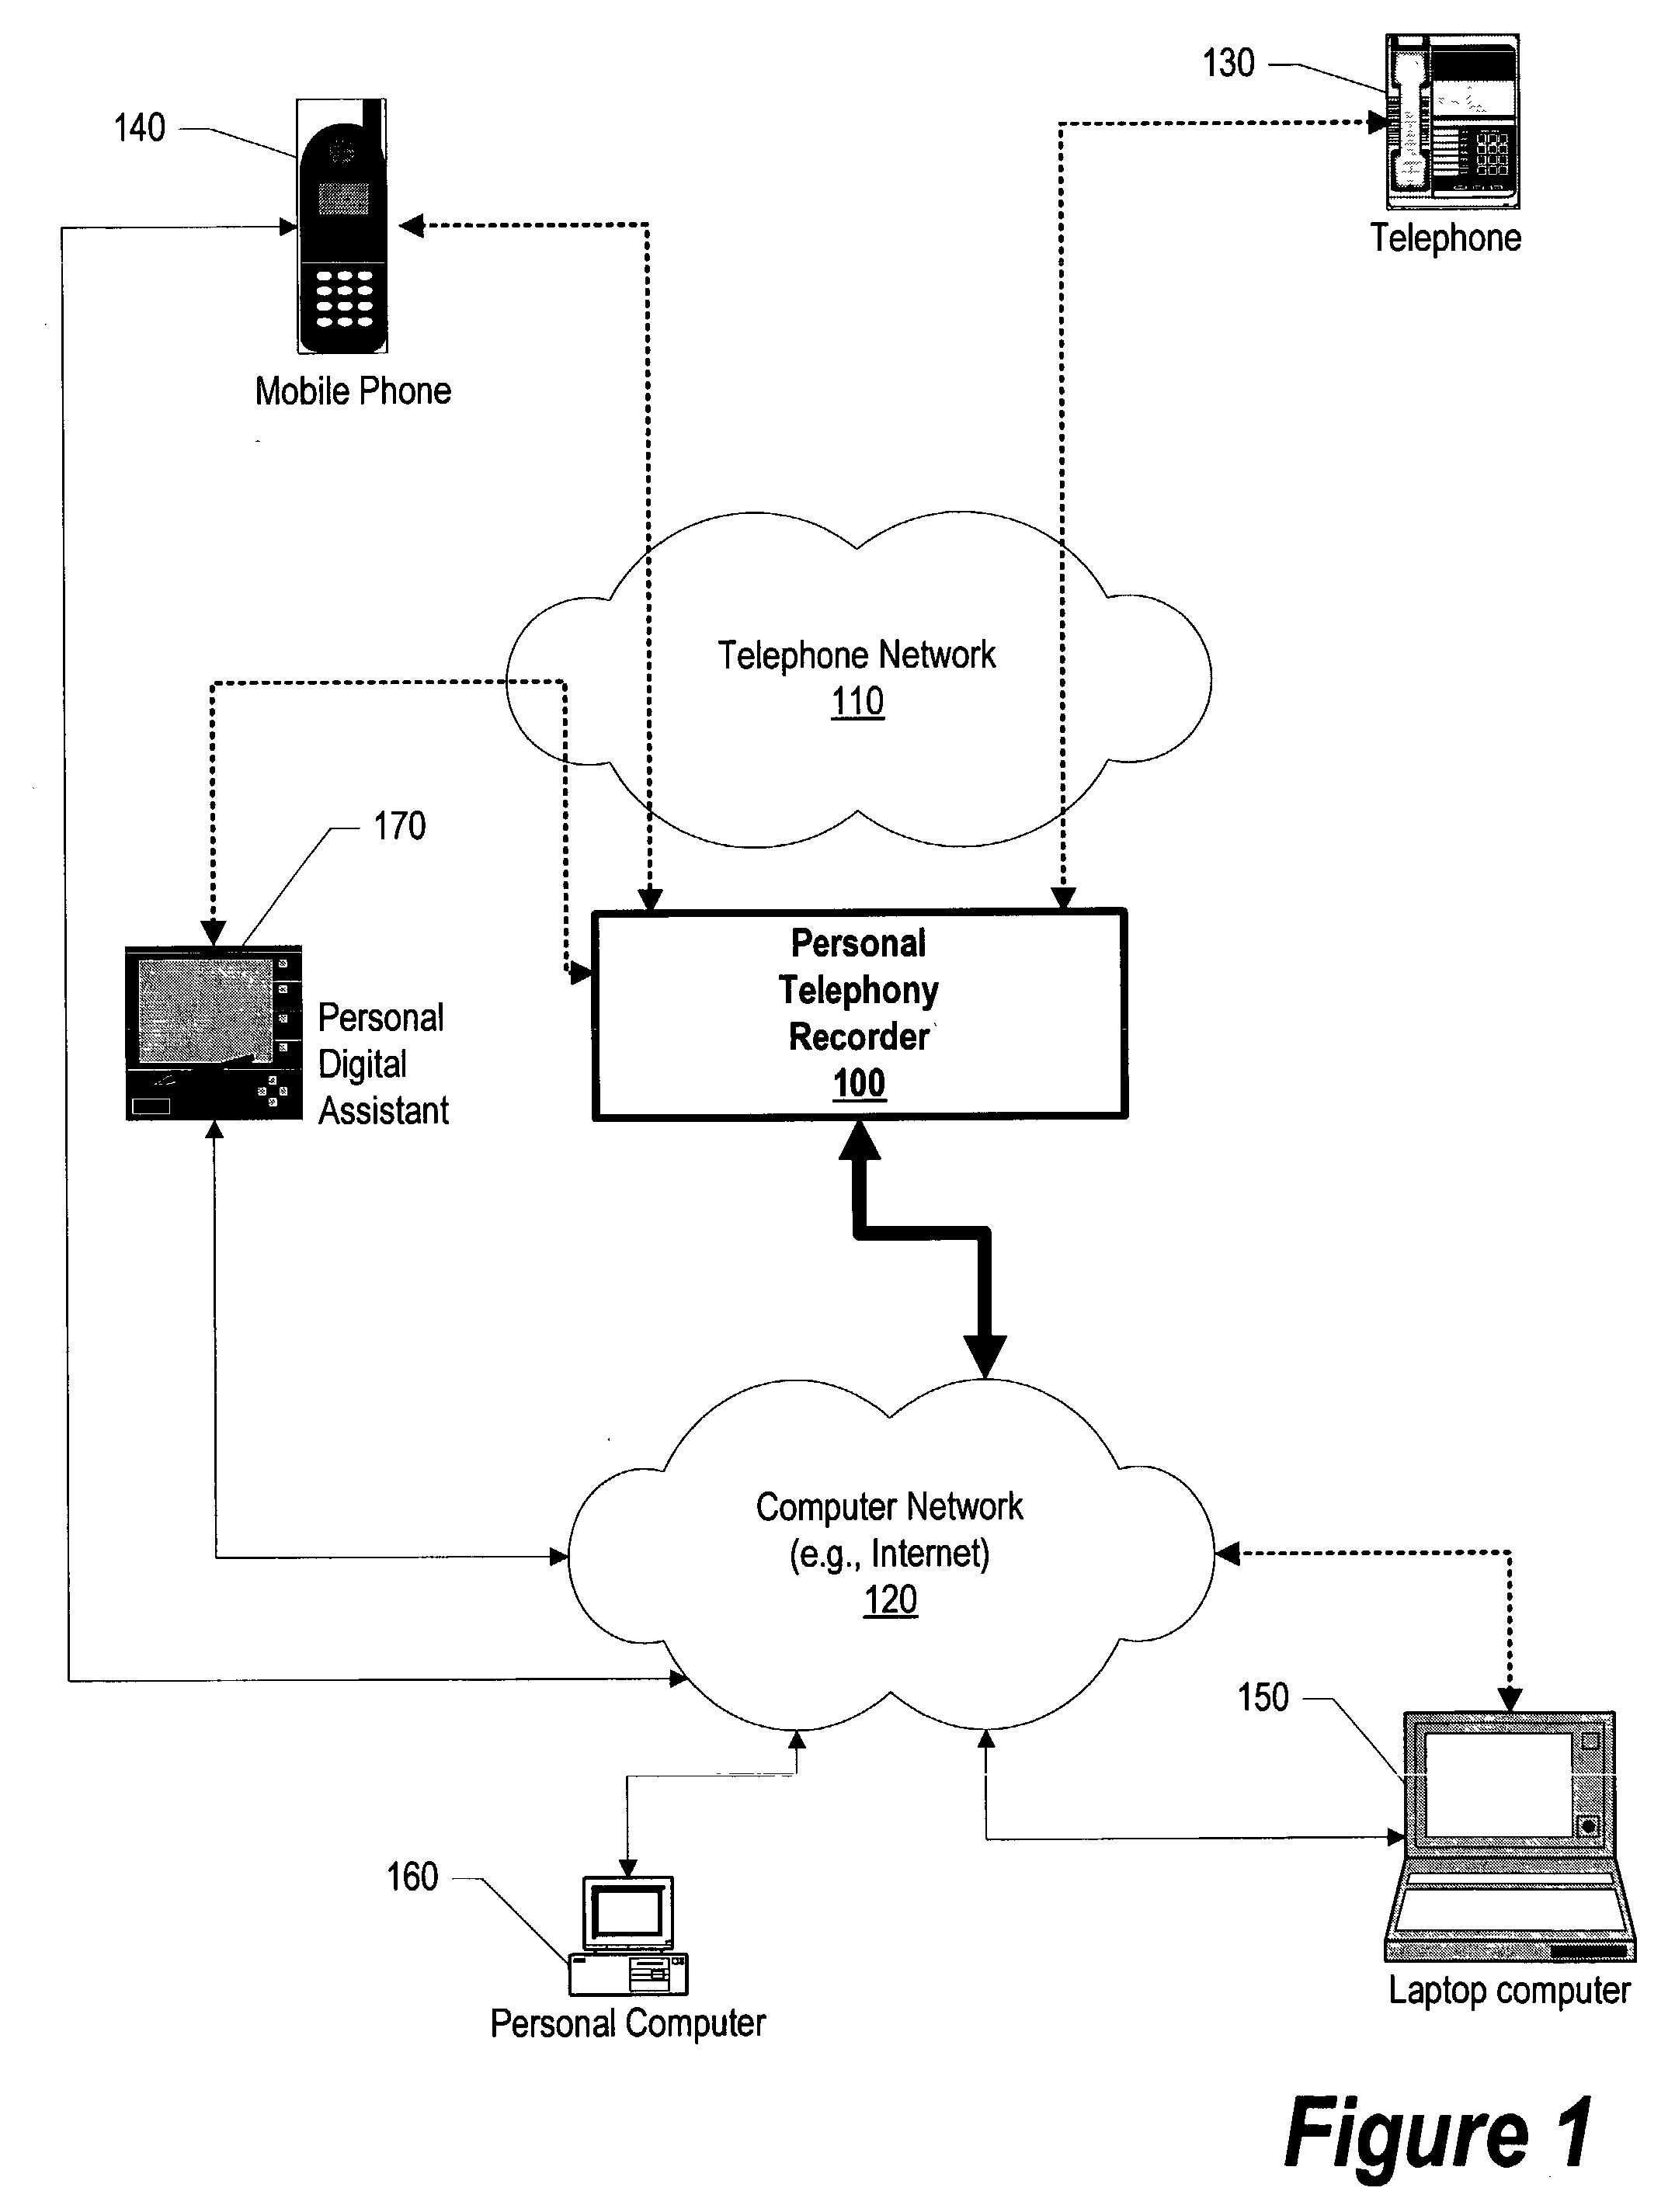 System and method for data mining of contextual conversations